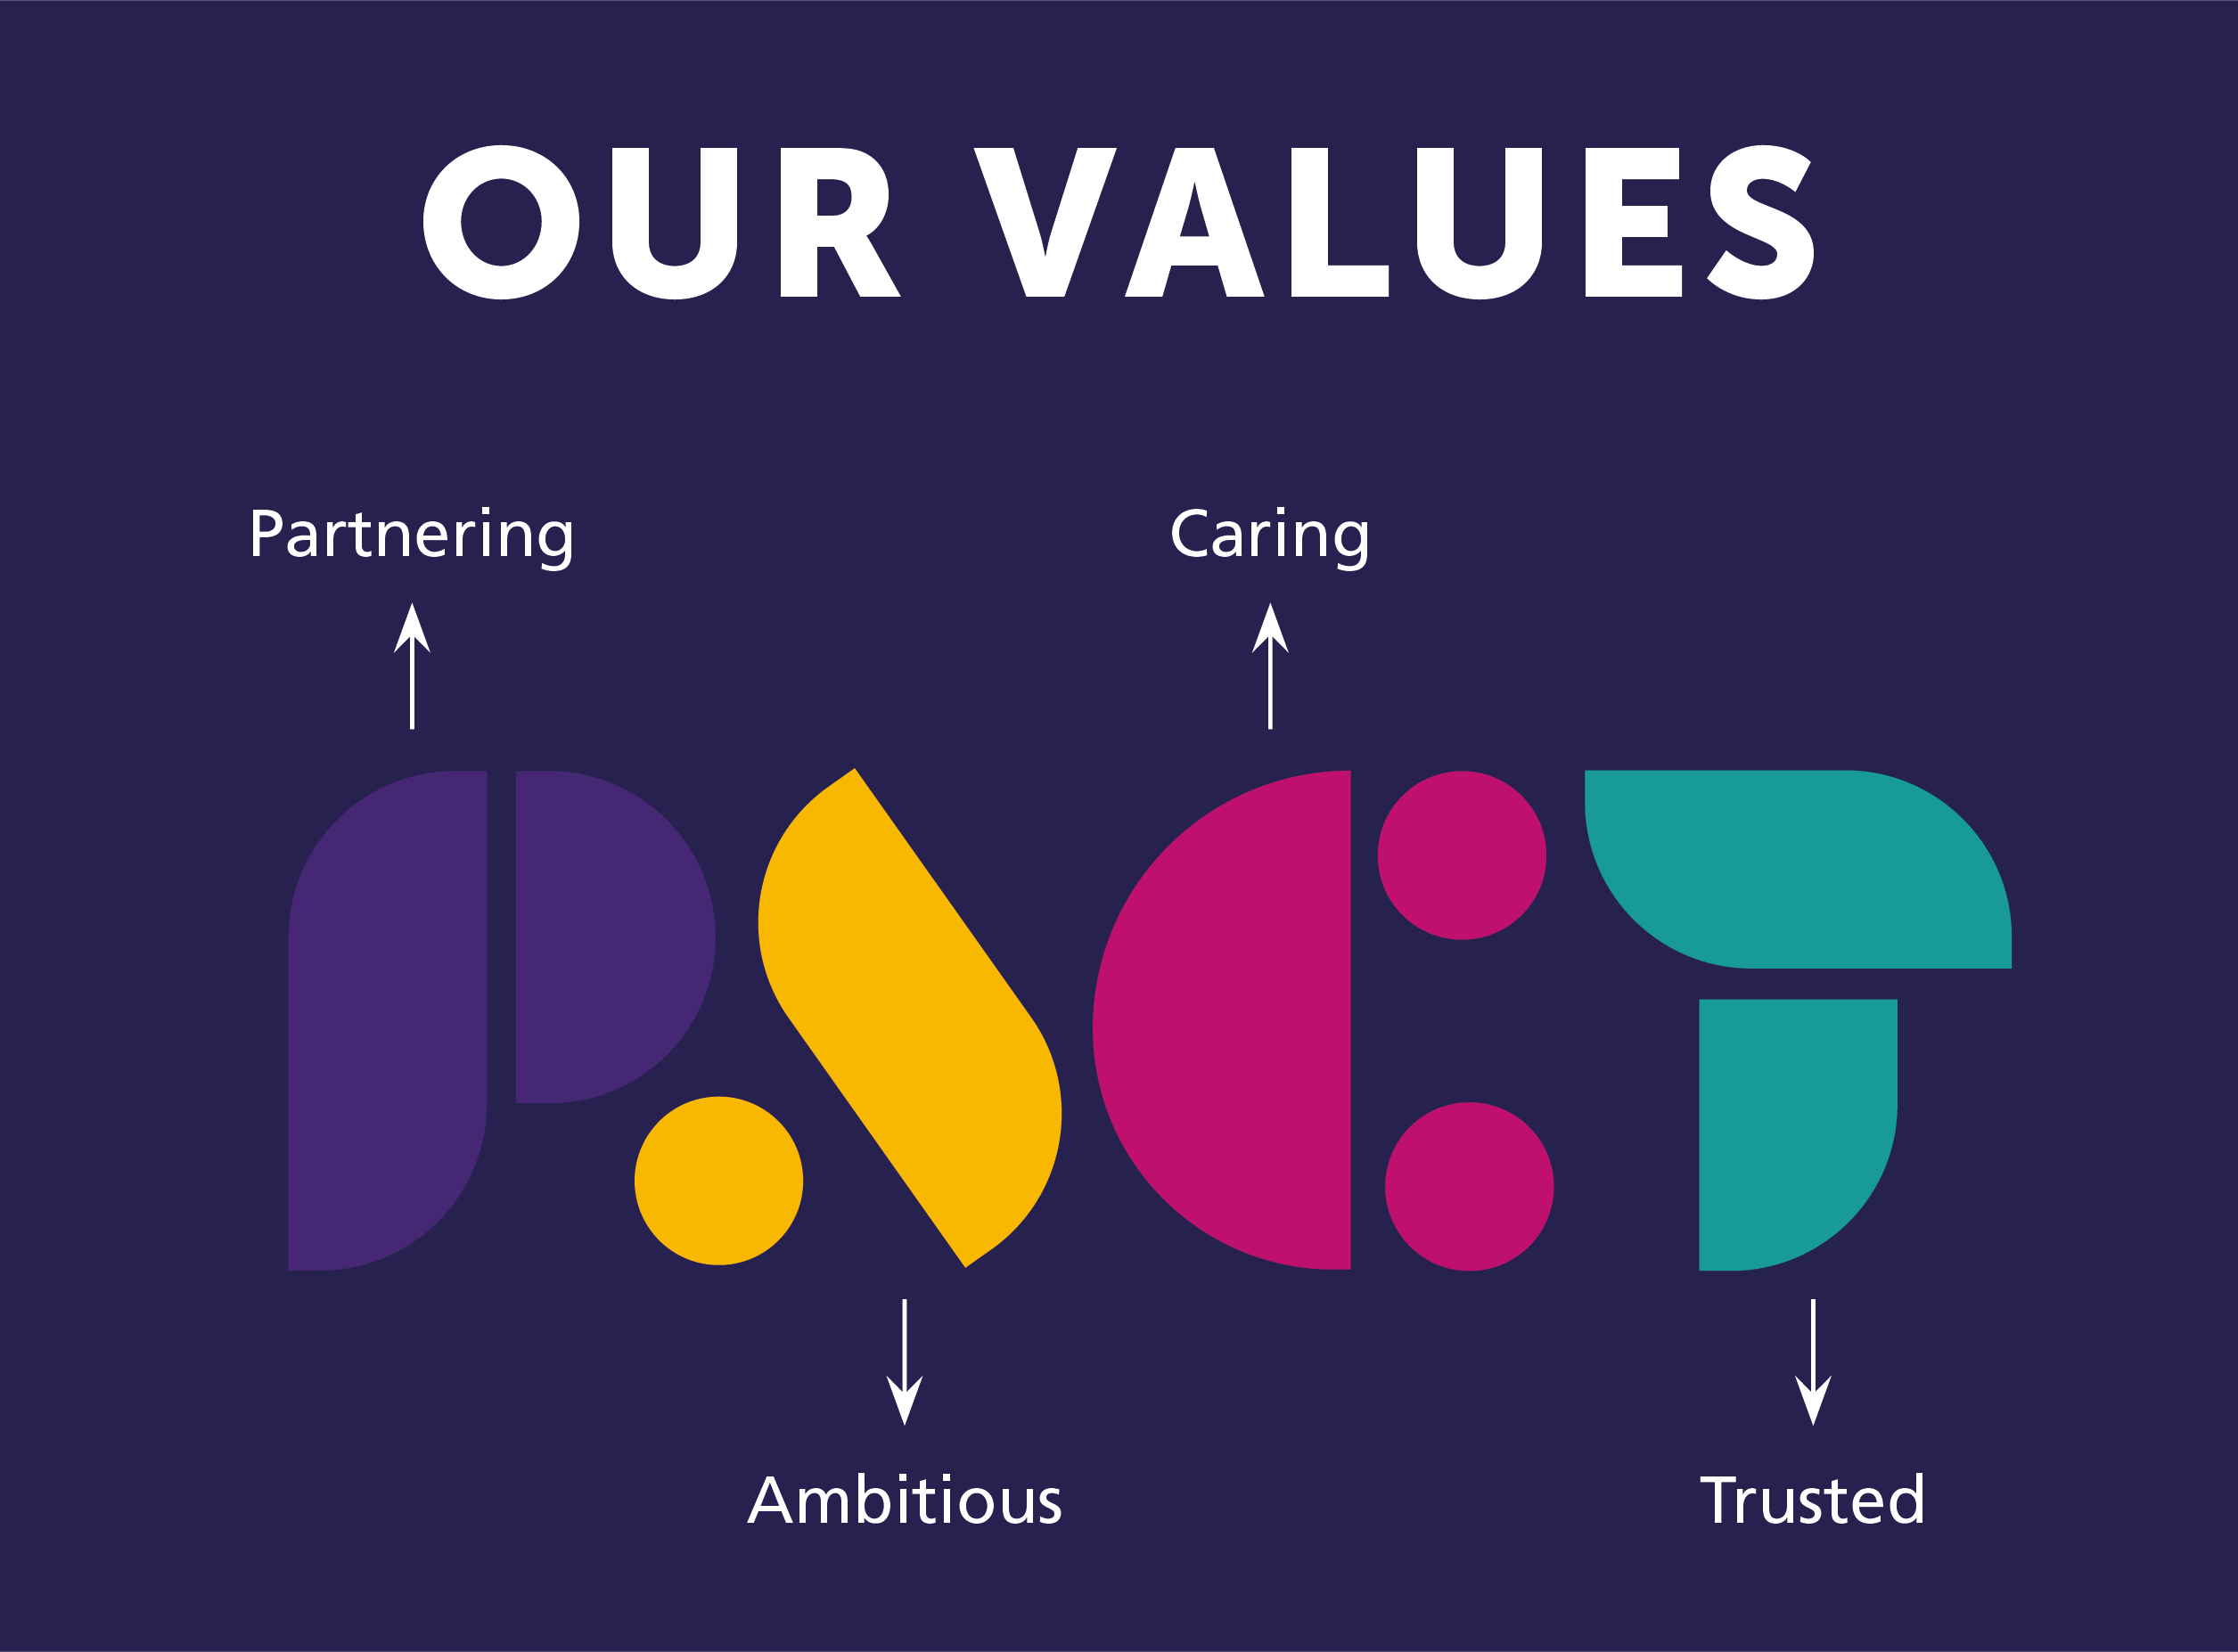 Our Values - PACT. Partnering, Ambitious, Caring, Trusted